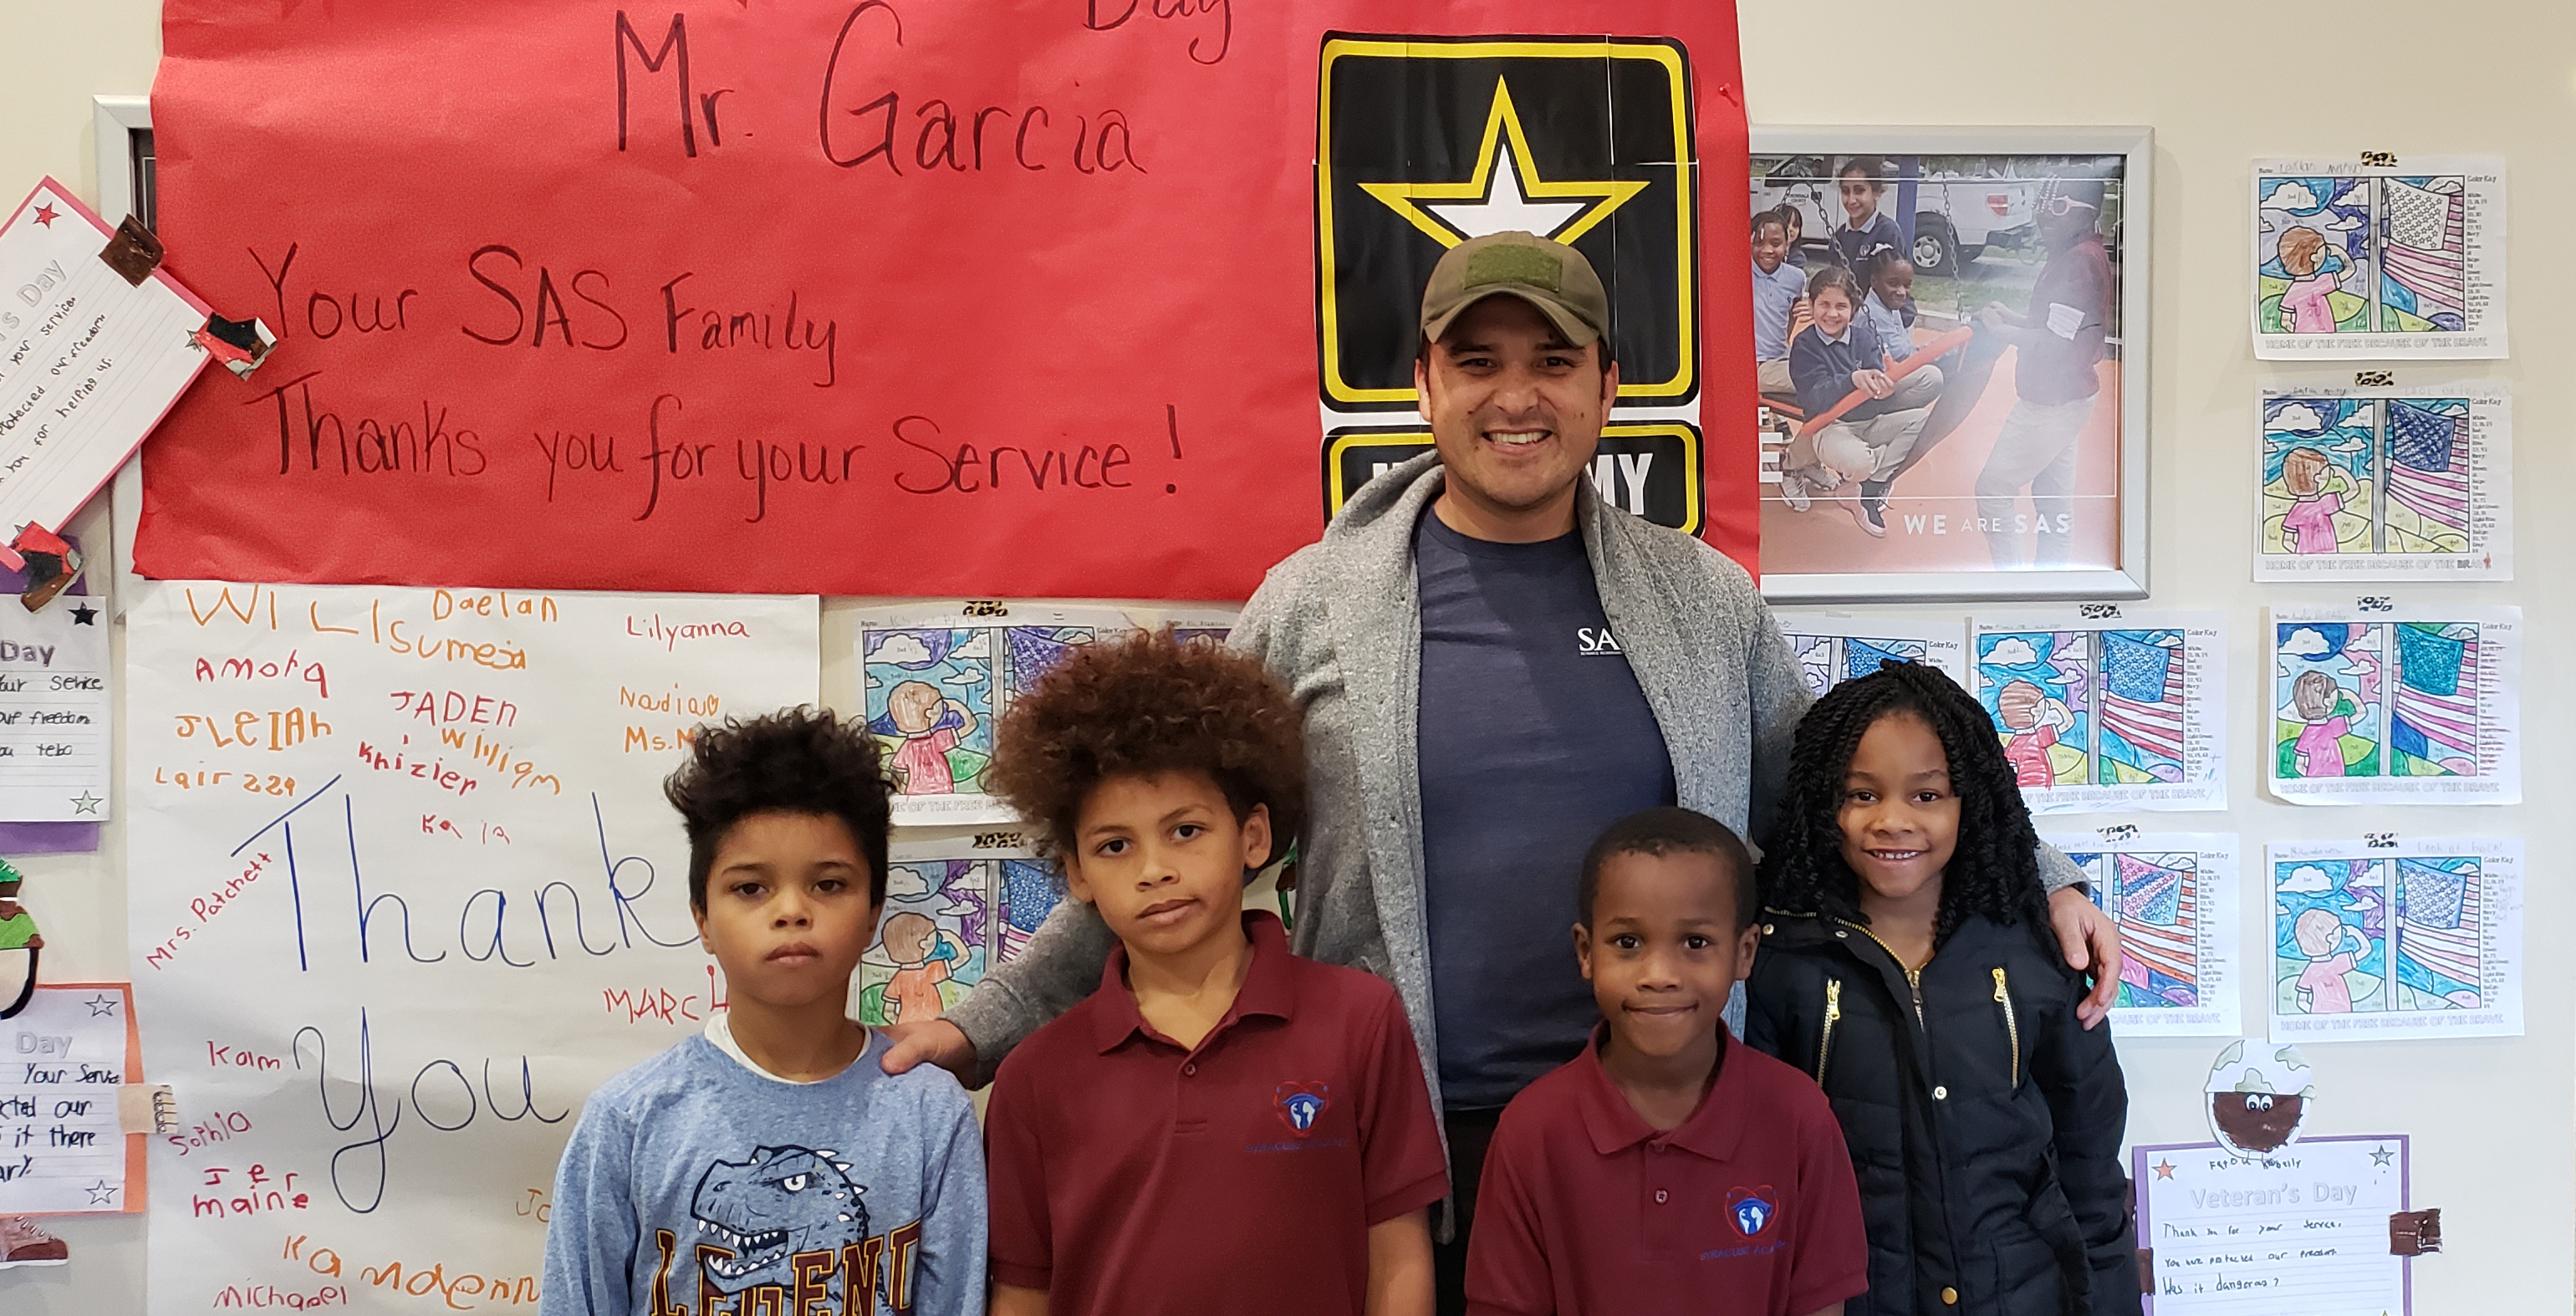 Atoms showed their appreciation to Veteran and co-teacher Mr. Garcia, in honor of Veterans Day